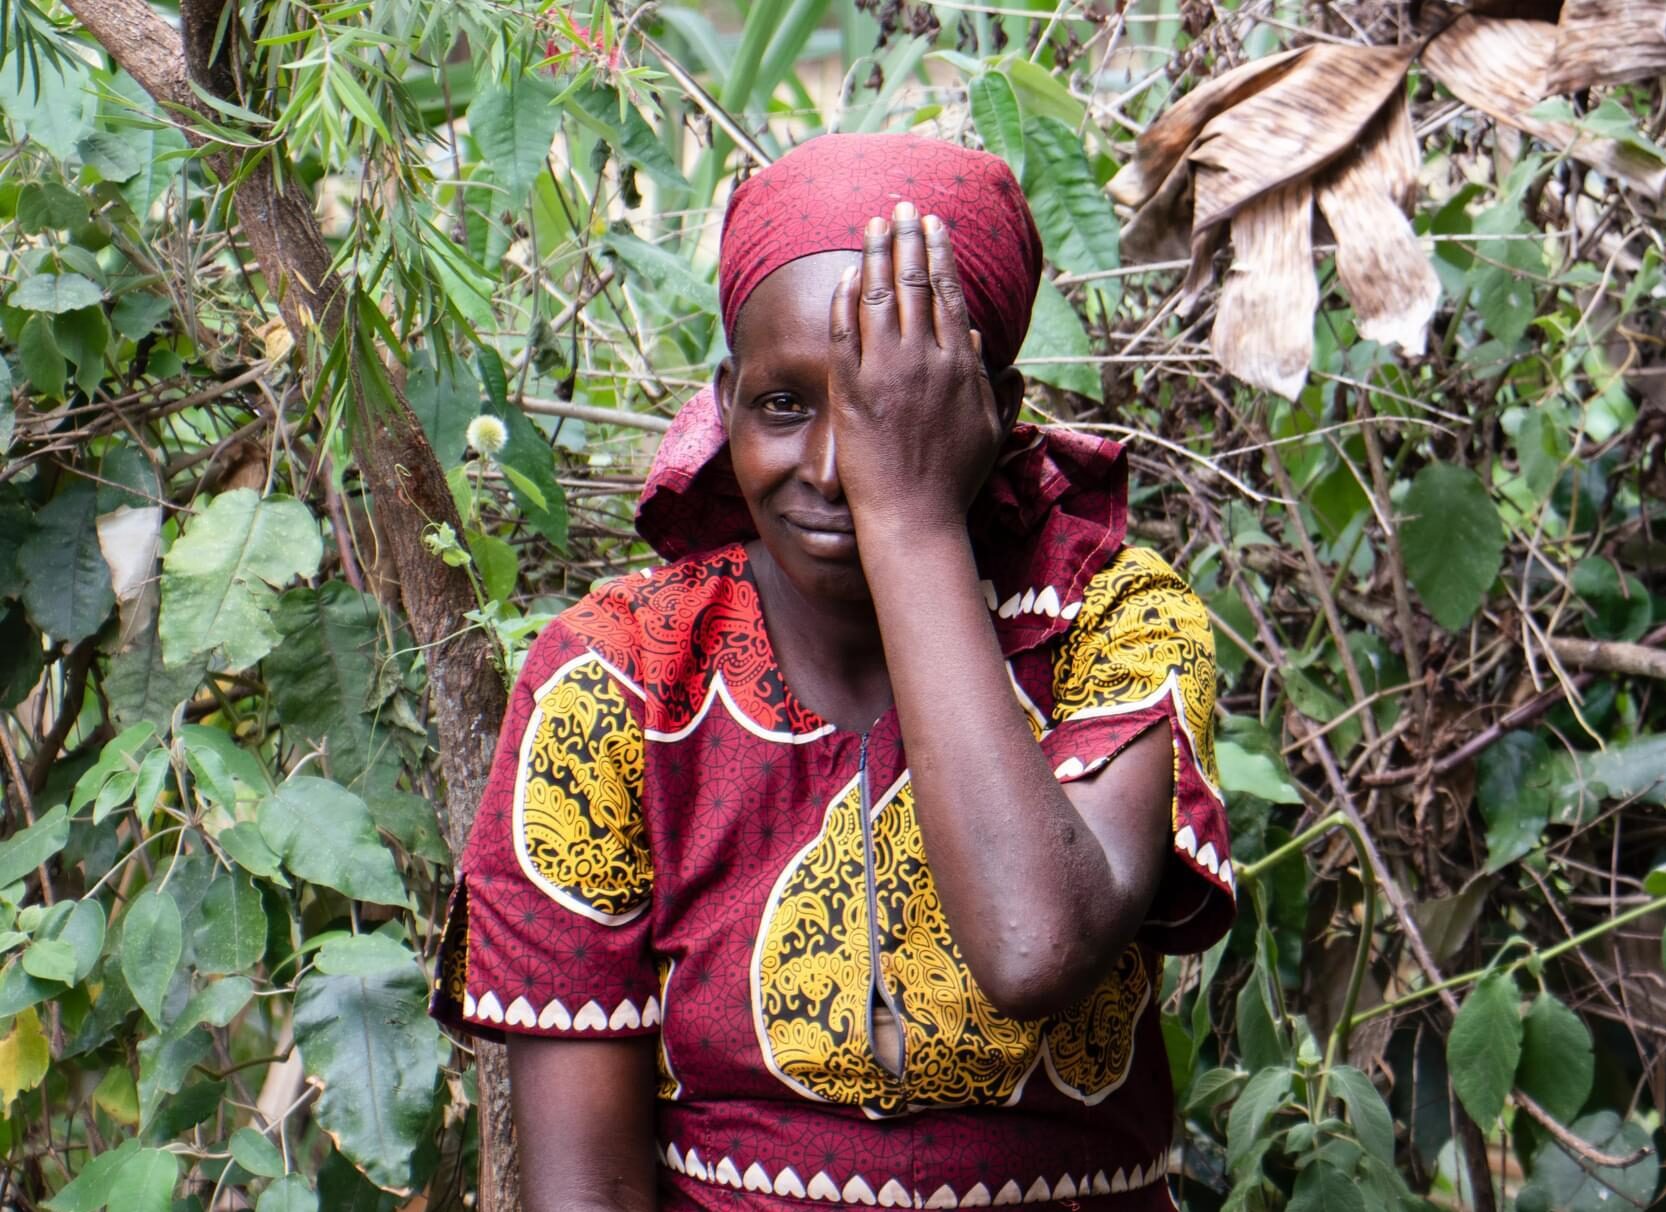 A woman having her eye screened as part of the Vision Impact Project in Bomet, with one hand over her left eye, and sitting in front of some trees.